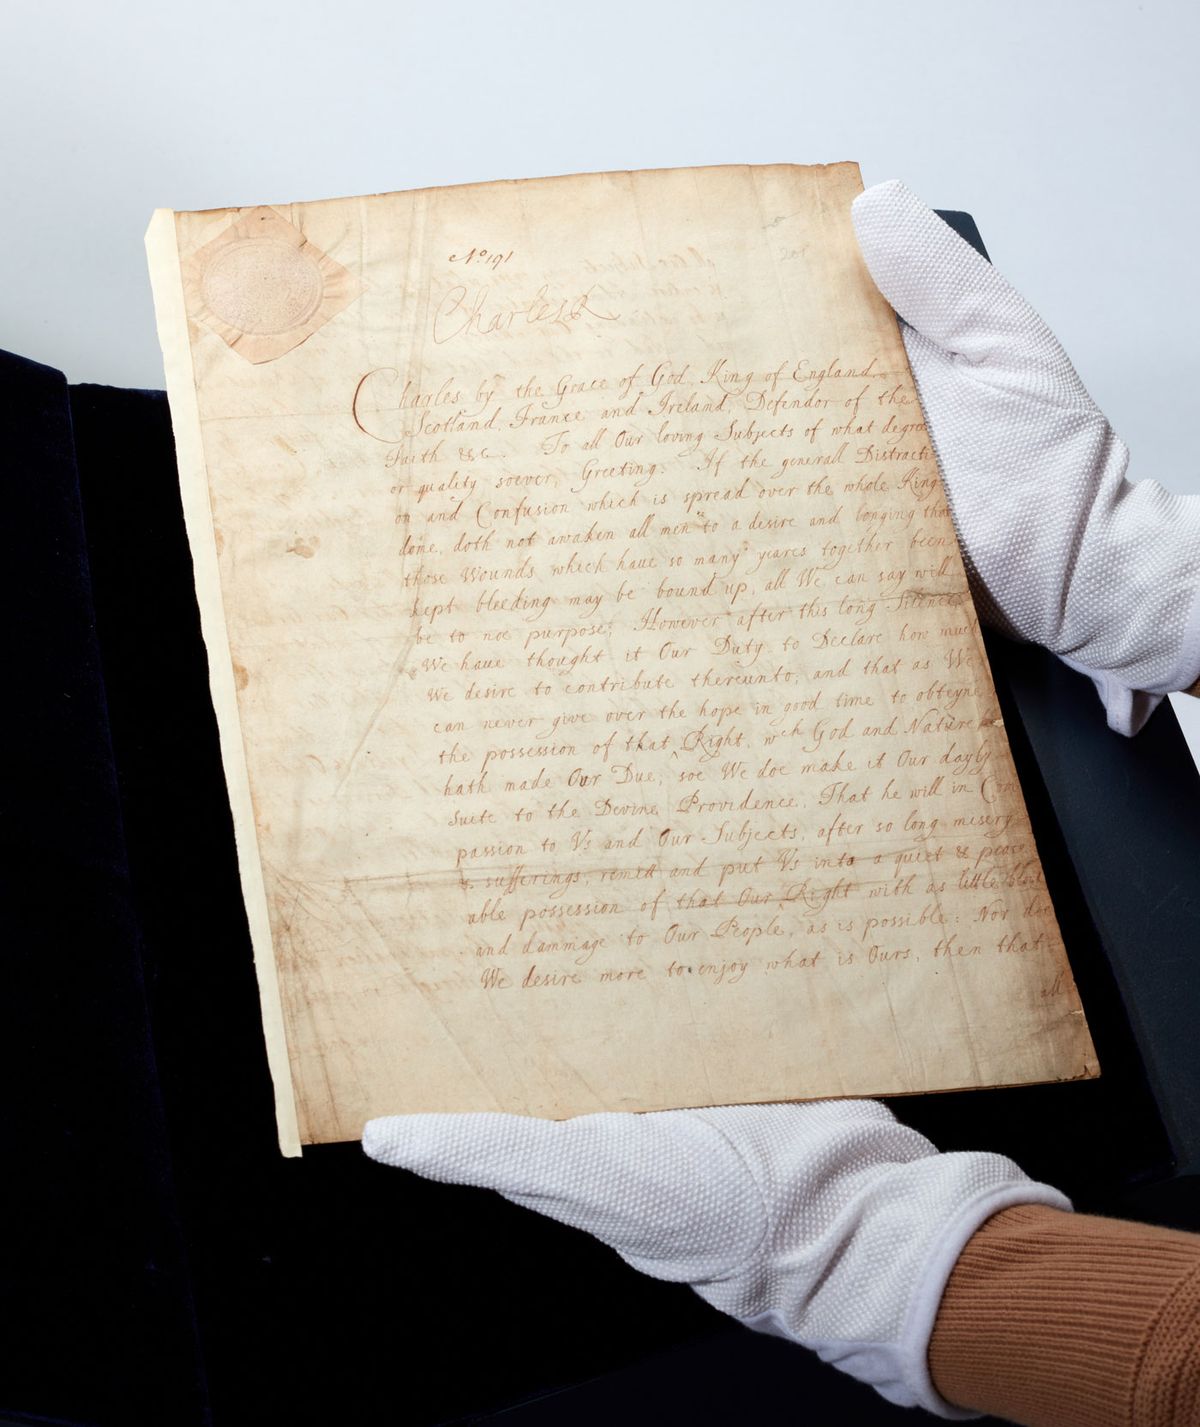 One of only two surviving signed copies of The Declaration of Breda, in which King Charles II set out his terms for the Restoration of the British monarchy in 1660, is on offer with an estimate of £400,000-£600,000 Courtesy Sotheby's